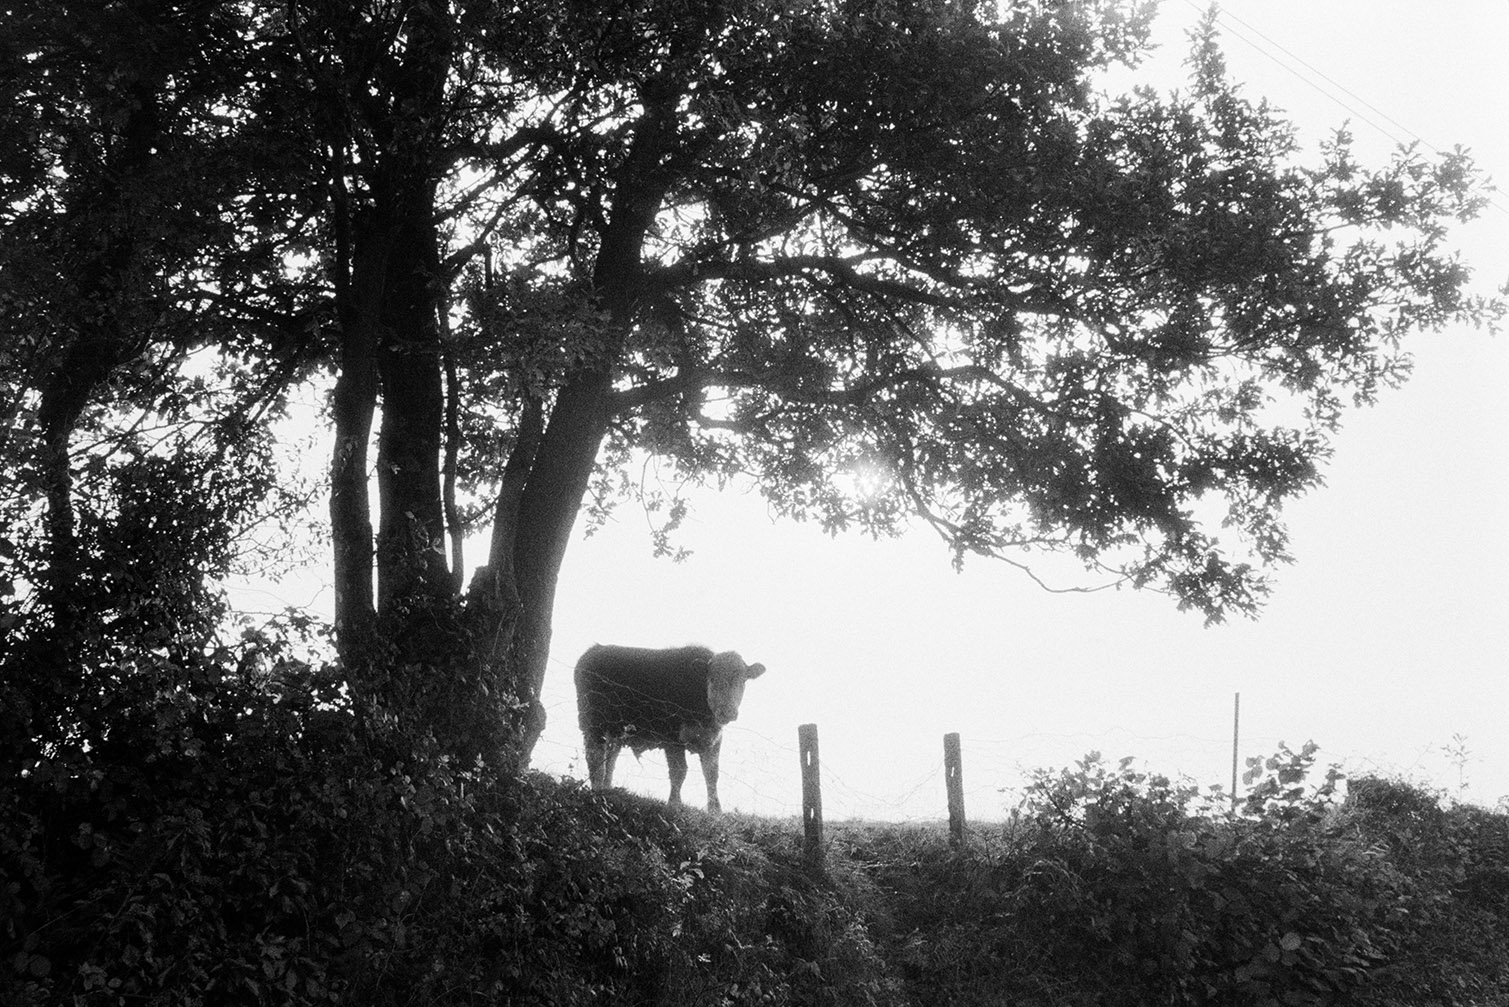 A bullock silhouetted next to a tree, in a field at Hatherleigh. It is looking over a wire fence to the road below.